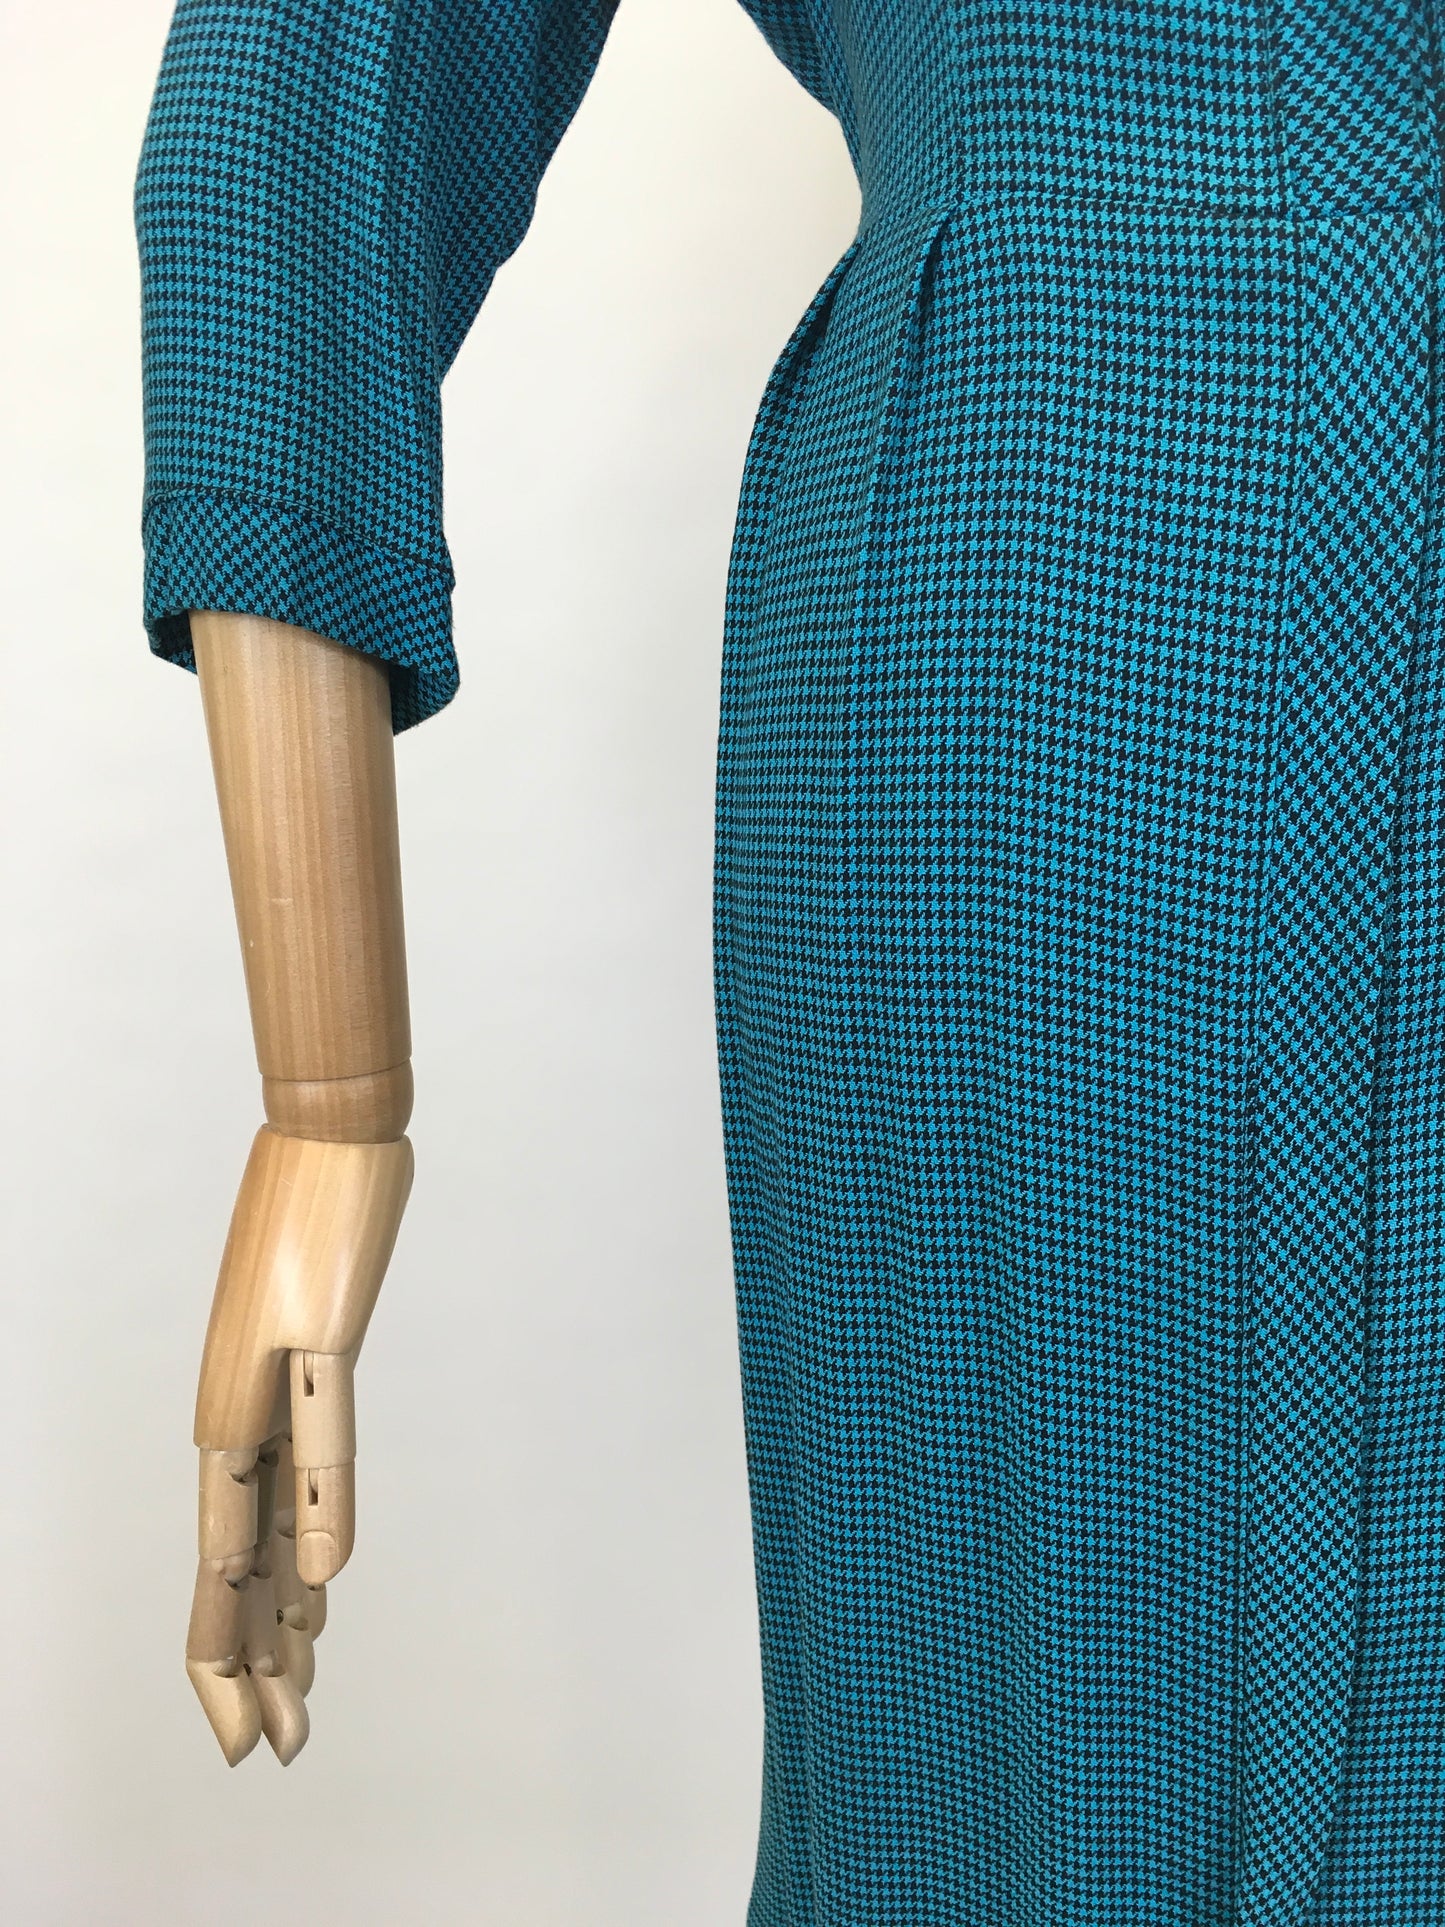 Original Early 1950’s Fabulous Day Dress - In A Lovely Deep Teal Dogtooth Cotton